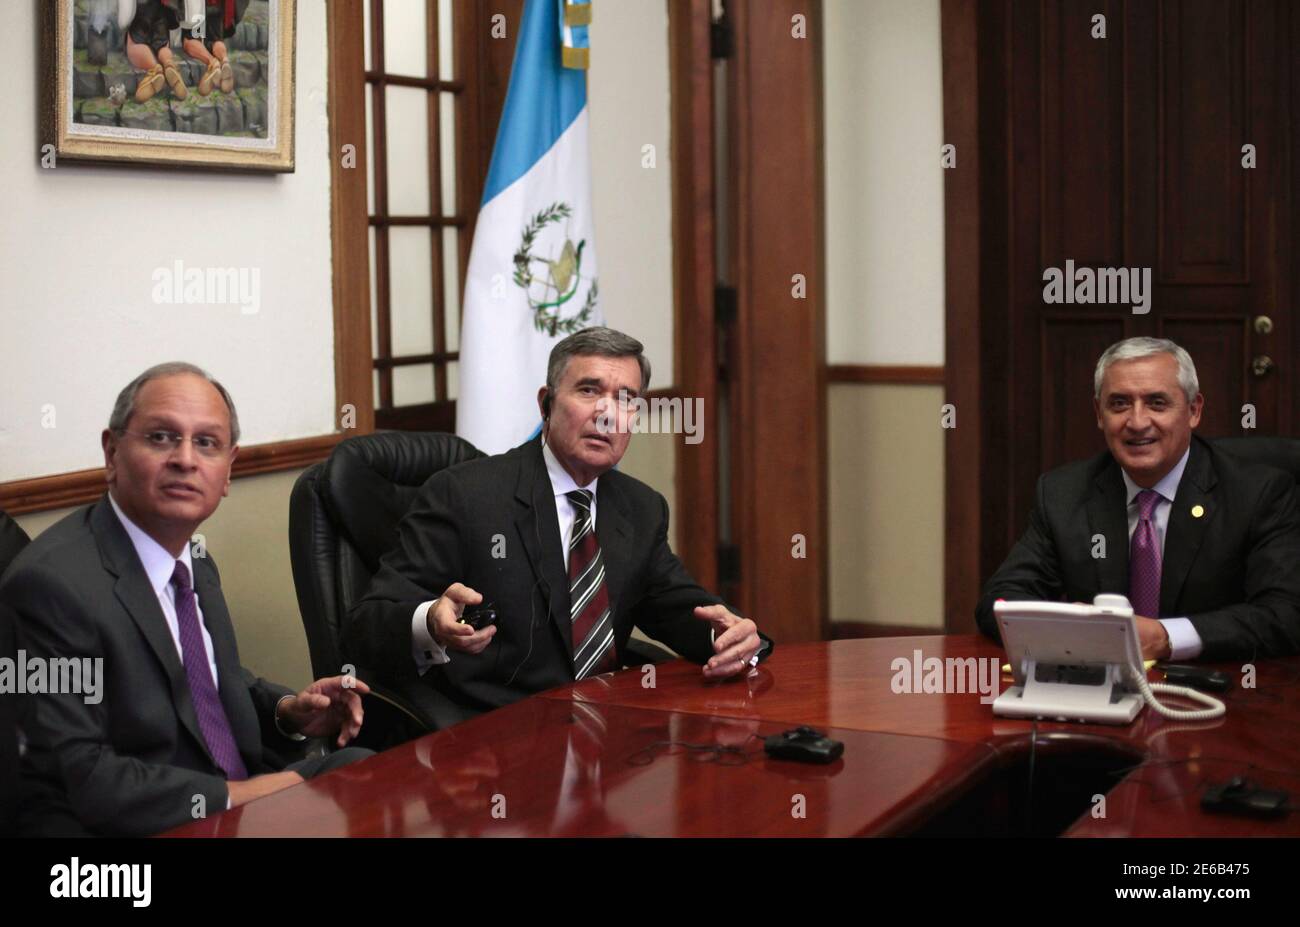 (From L-R) U.S Ambassador to Guatemala Arnold Chacon, Director of the Office of National Drug Control Policy Gil Kerlikowske and Guatemalan President Otto Perez Molina are seen during a meeting in the Presidential House in Guatemala City, June 21, 2012. According to local media, Kerlikowske, who helped reduce cocaine consumption by 40% in the U.S, is in Guatemala to discuss with authorities on strategies to combat the use of the drug in the country. REUTERS/Jorge Dan Lopez (GUATEMALA - Tags: POLITICS CRIME LAW DRUGS SOCIETY) Stock Photo